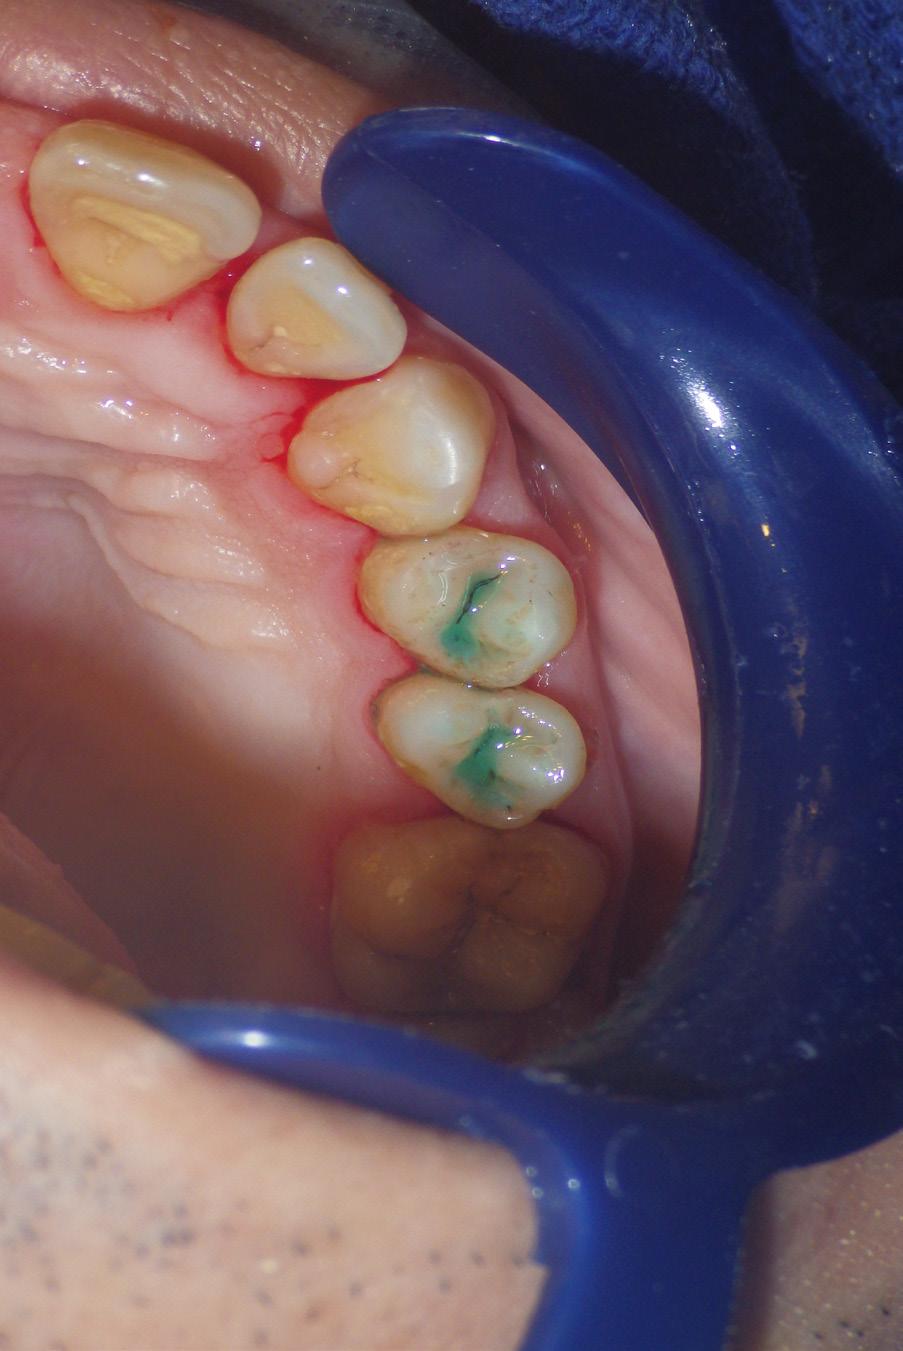 Figure 6. Polyacrylic acid over the entire occlusal tooth surface applied with a microbrush Figure 7. GIC sealants placed on teeth # 24 and # 25 Figures 8 and 8.